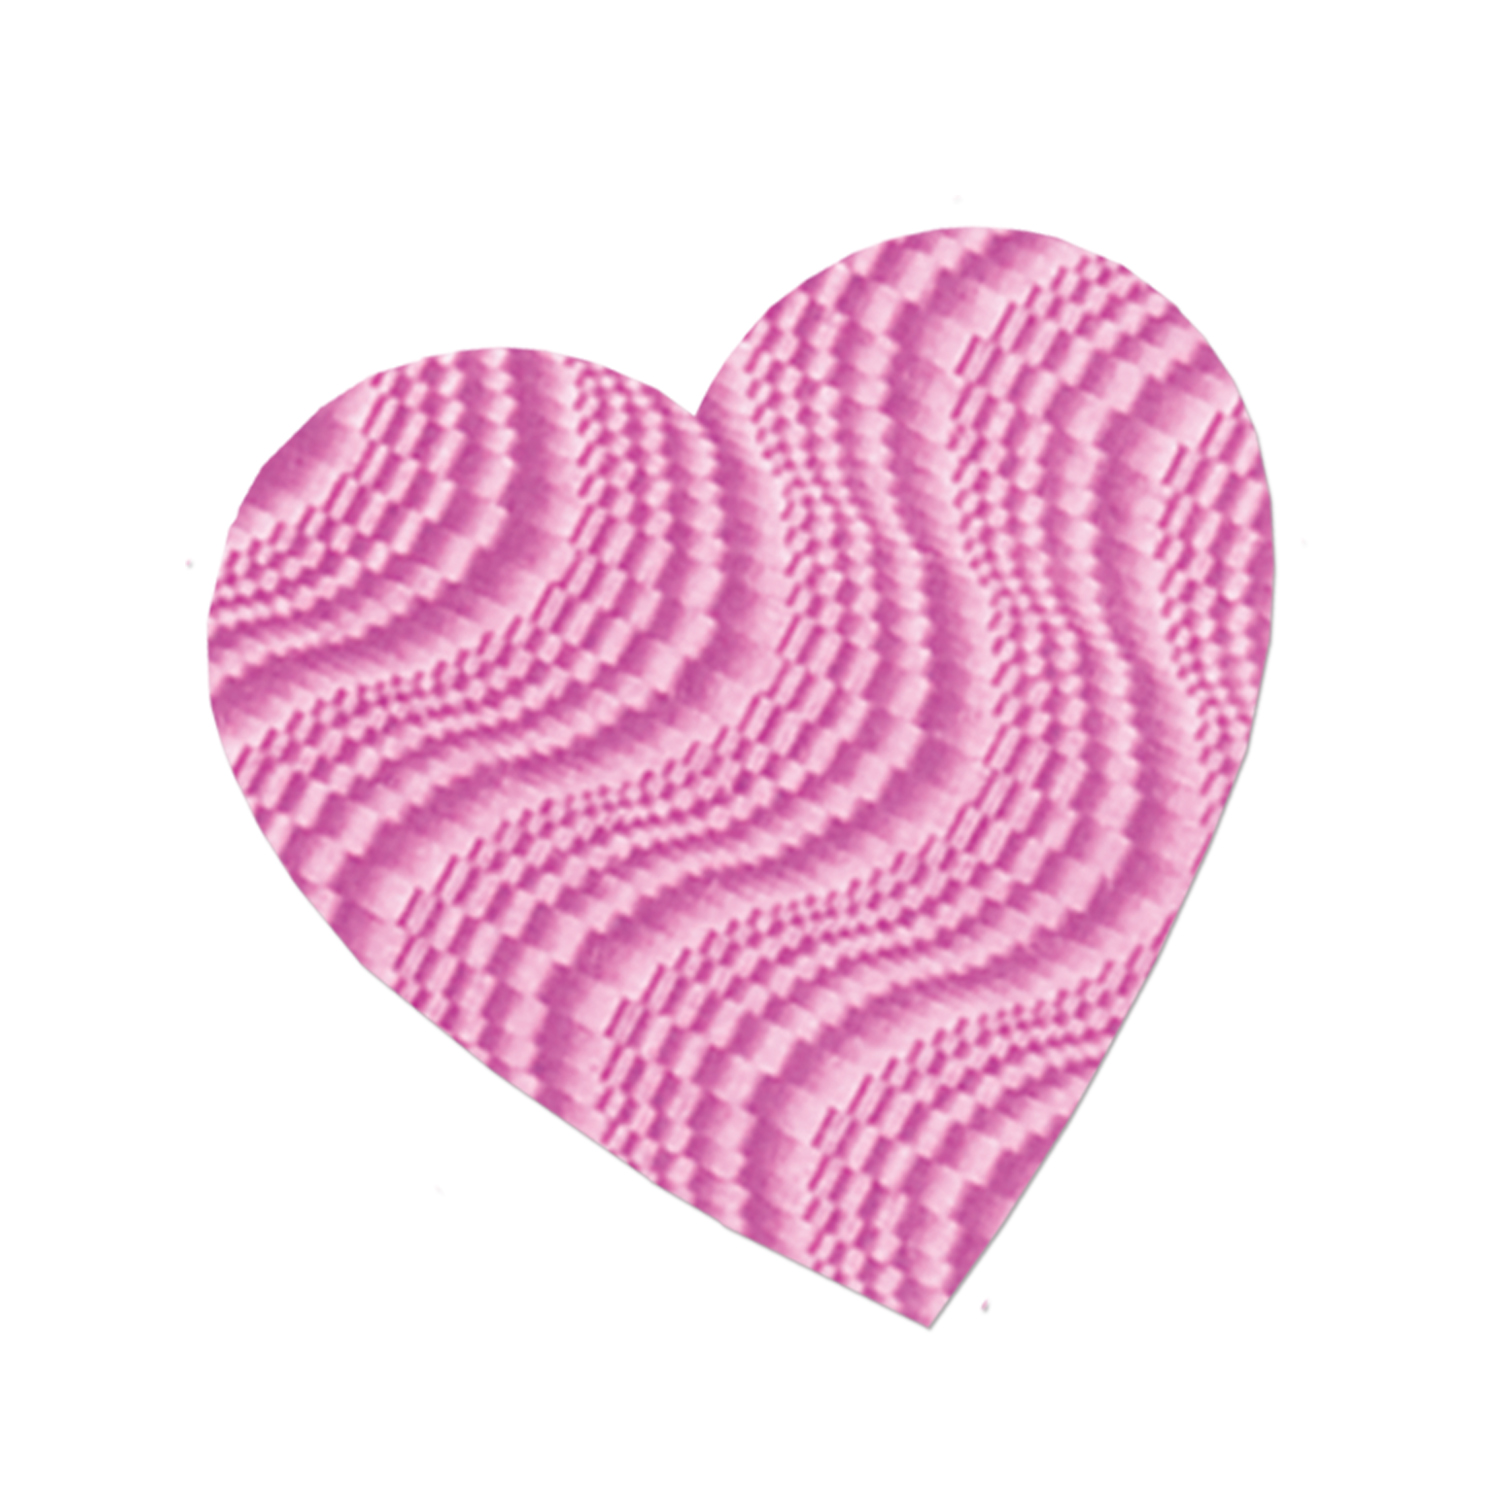 Embossed Foil Heart Cutout